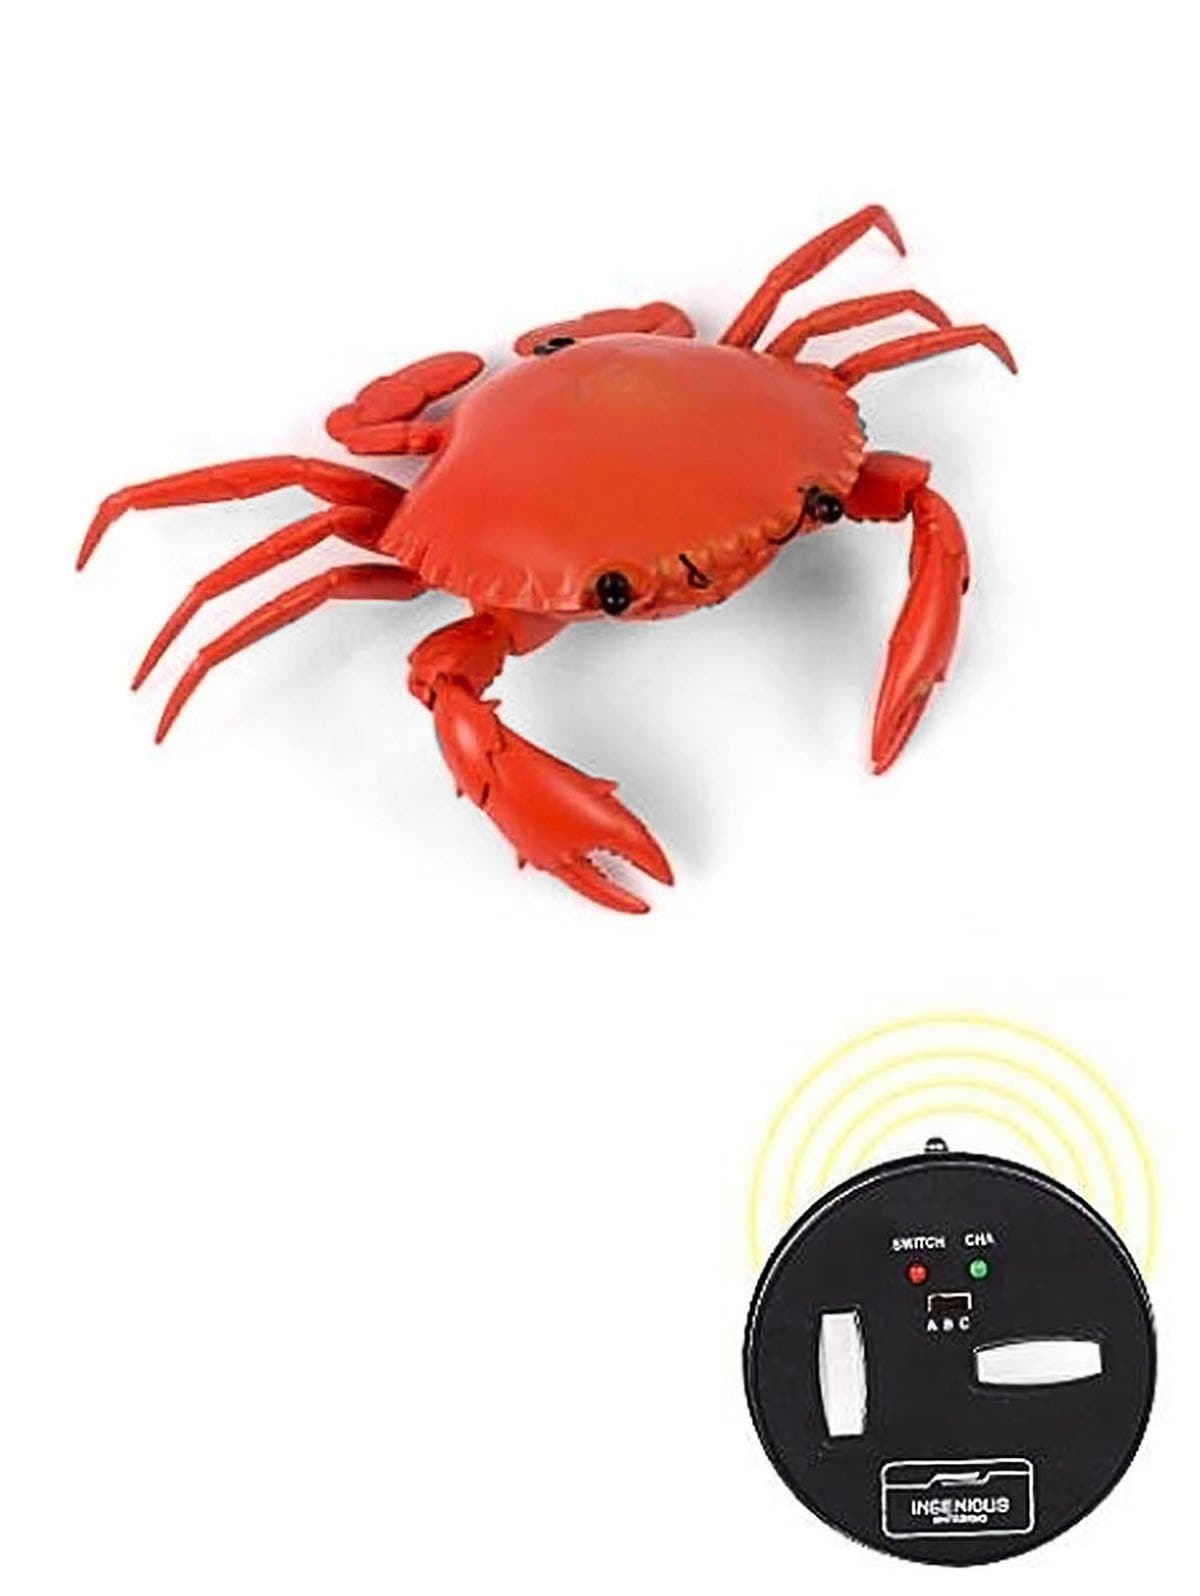 Infrared Remote Control Simulation Crab Toy